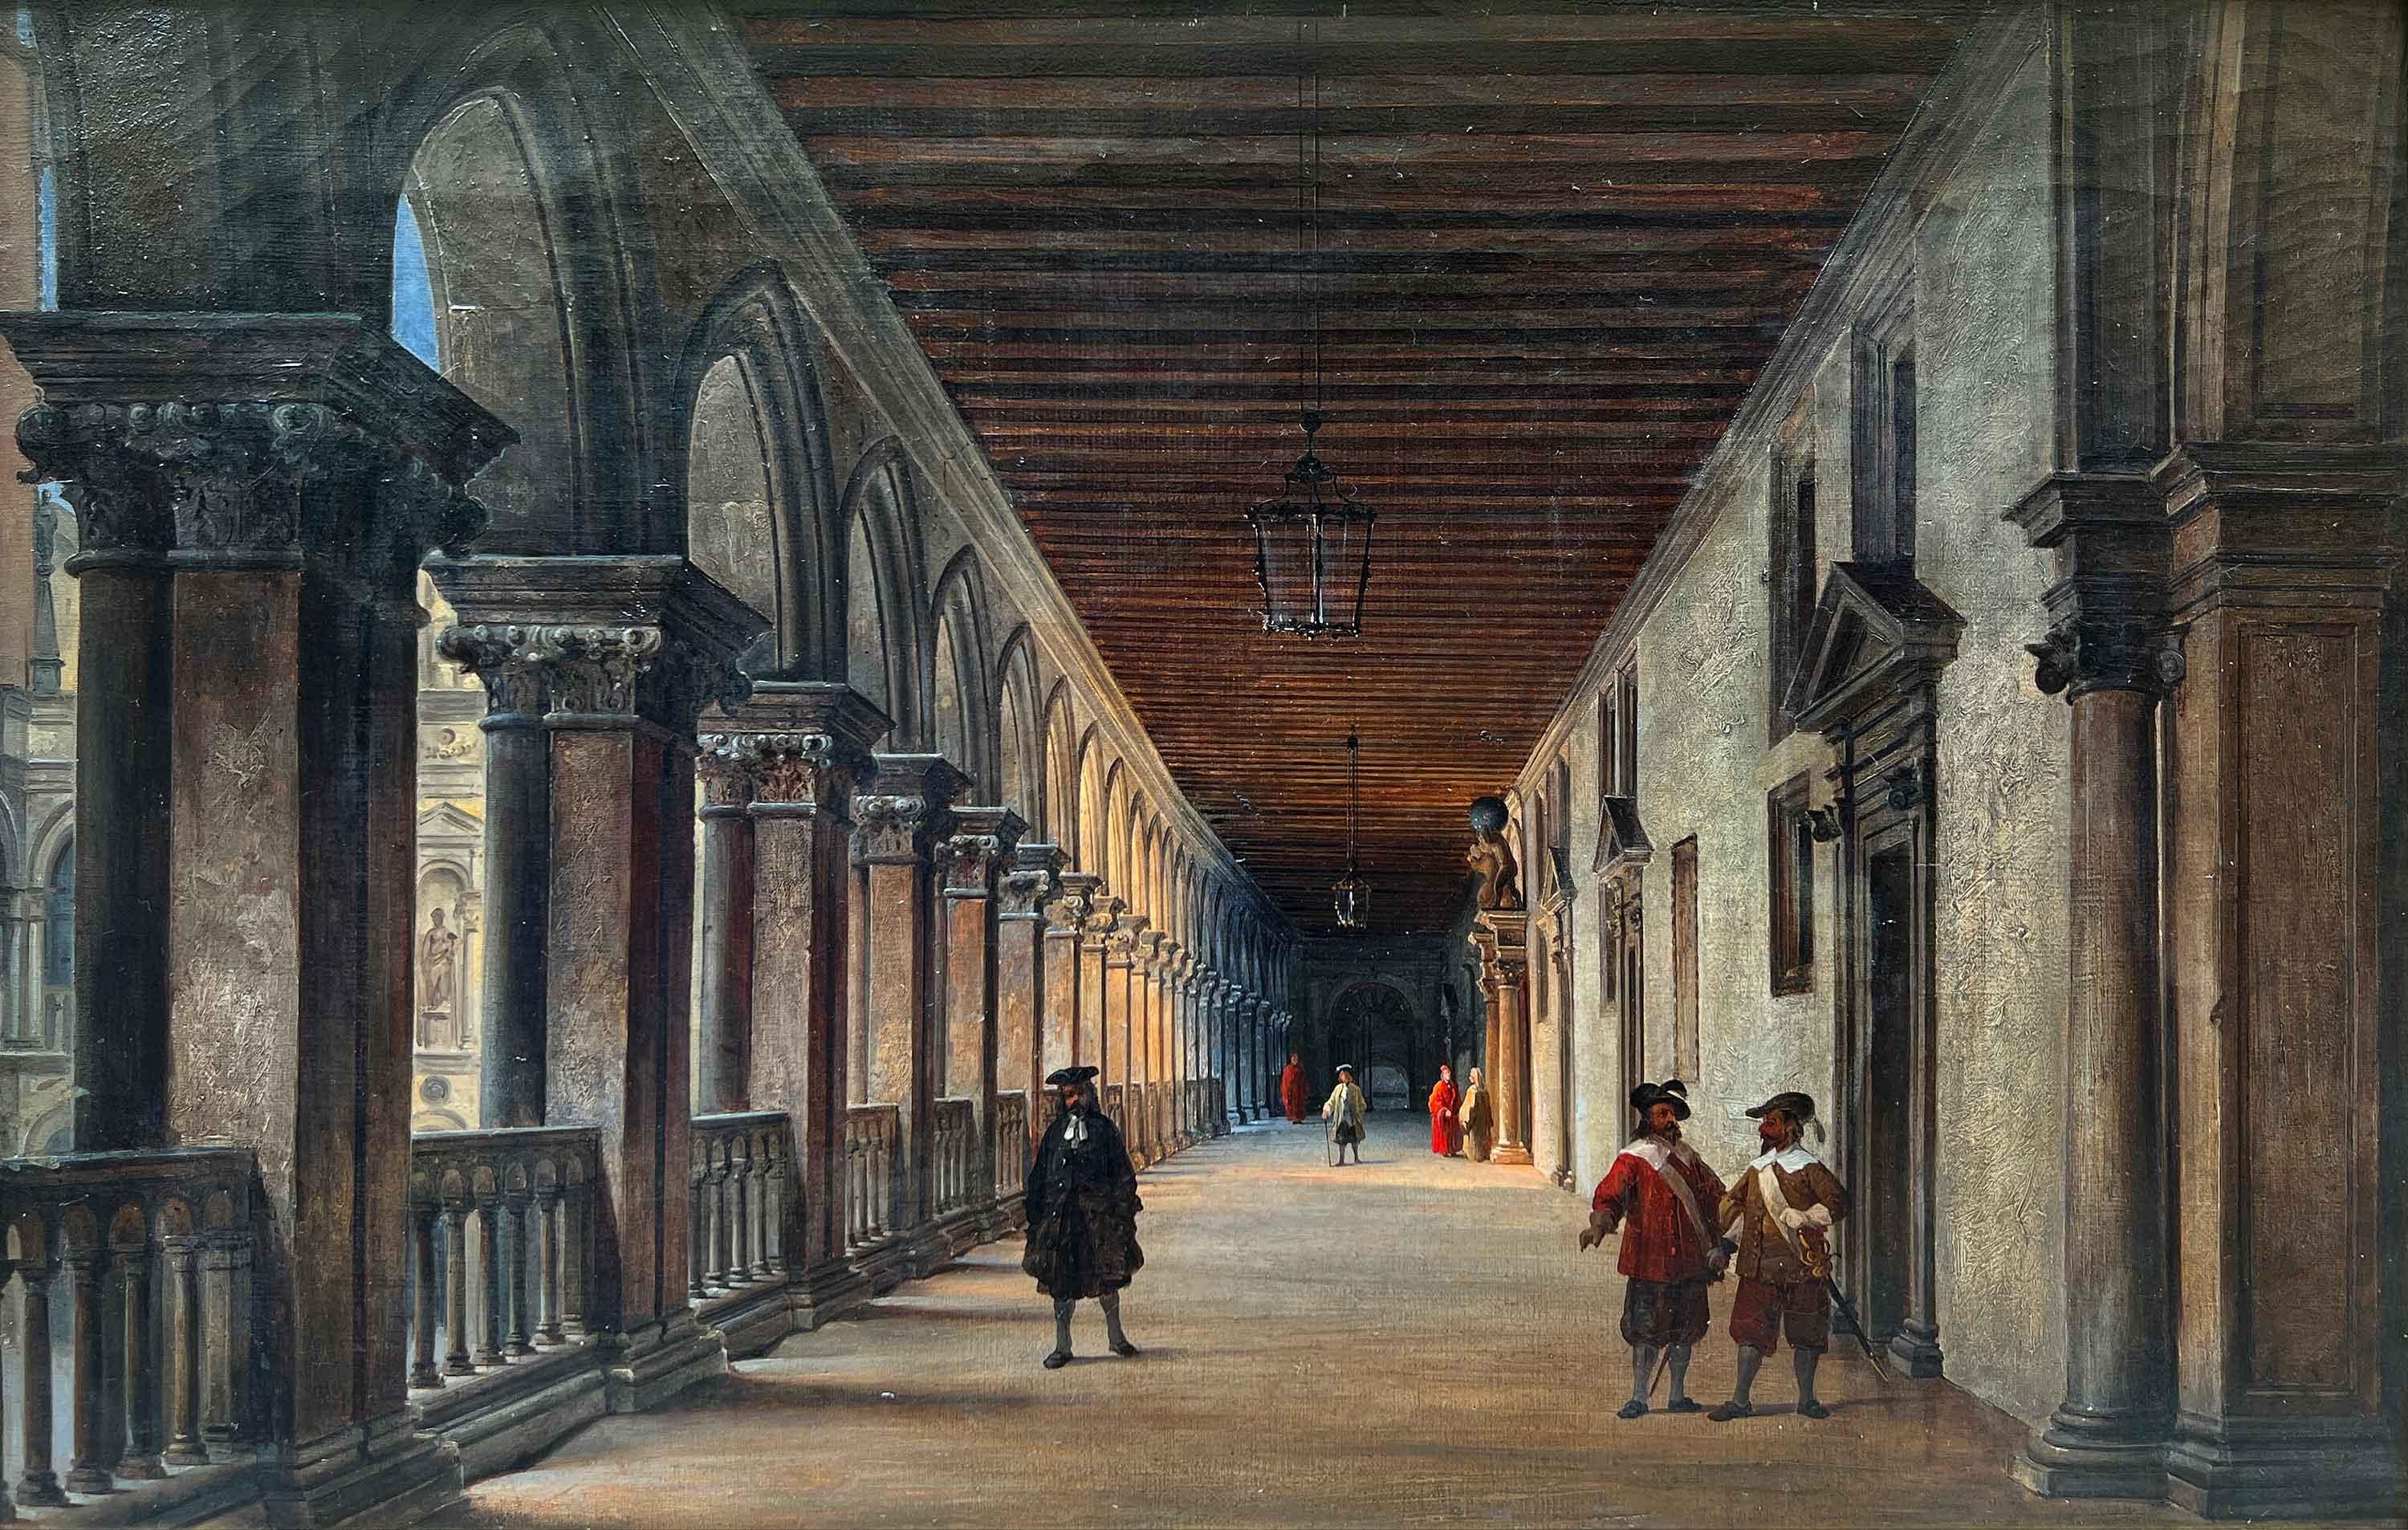 The Loggia of the Doge's Palace in Venice  - Painting by Luigi Querena